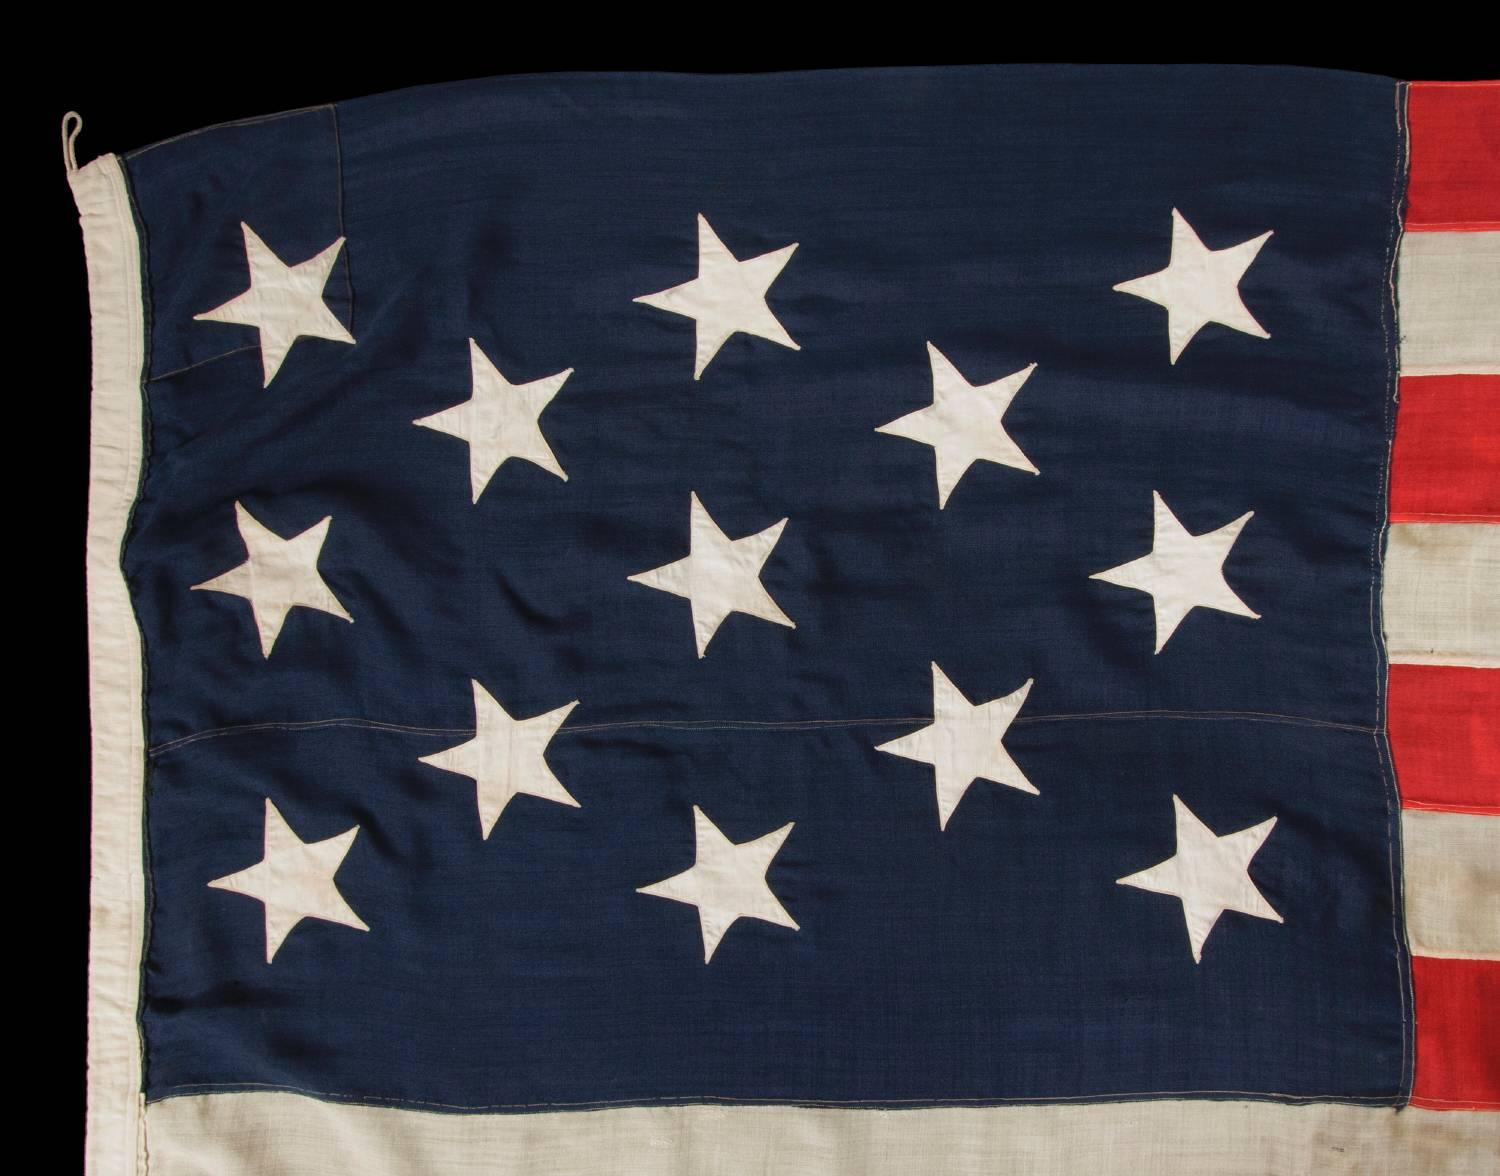 13 stars in a 3-2-3-2-3 lineal configuration on a large-scale flag made during the last quarter of the 19th century

13 star American national flag, made sometime between the nation's 100 year anniversary of independence and the year 1900. The